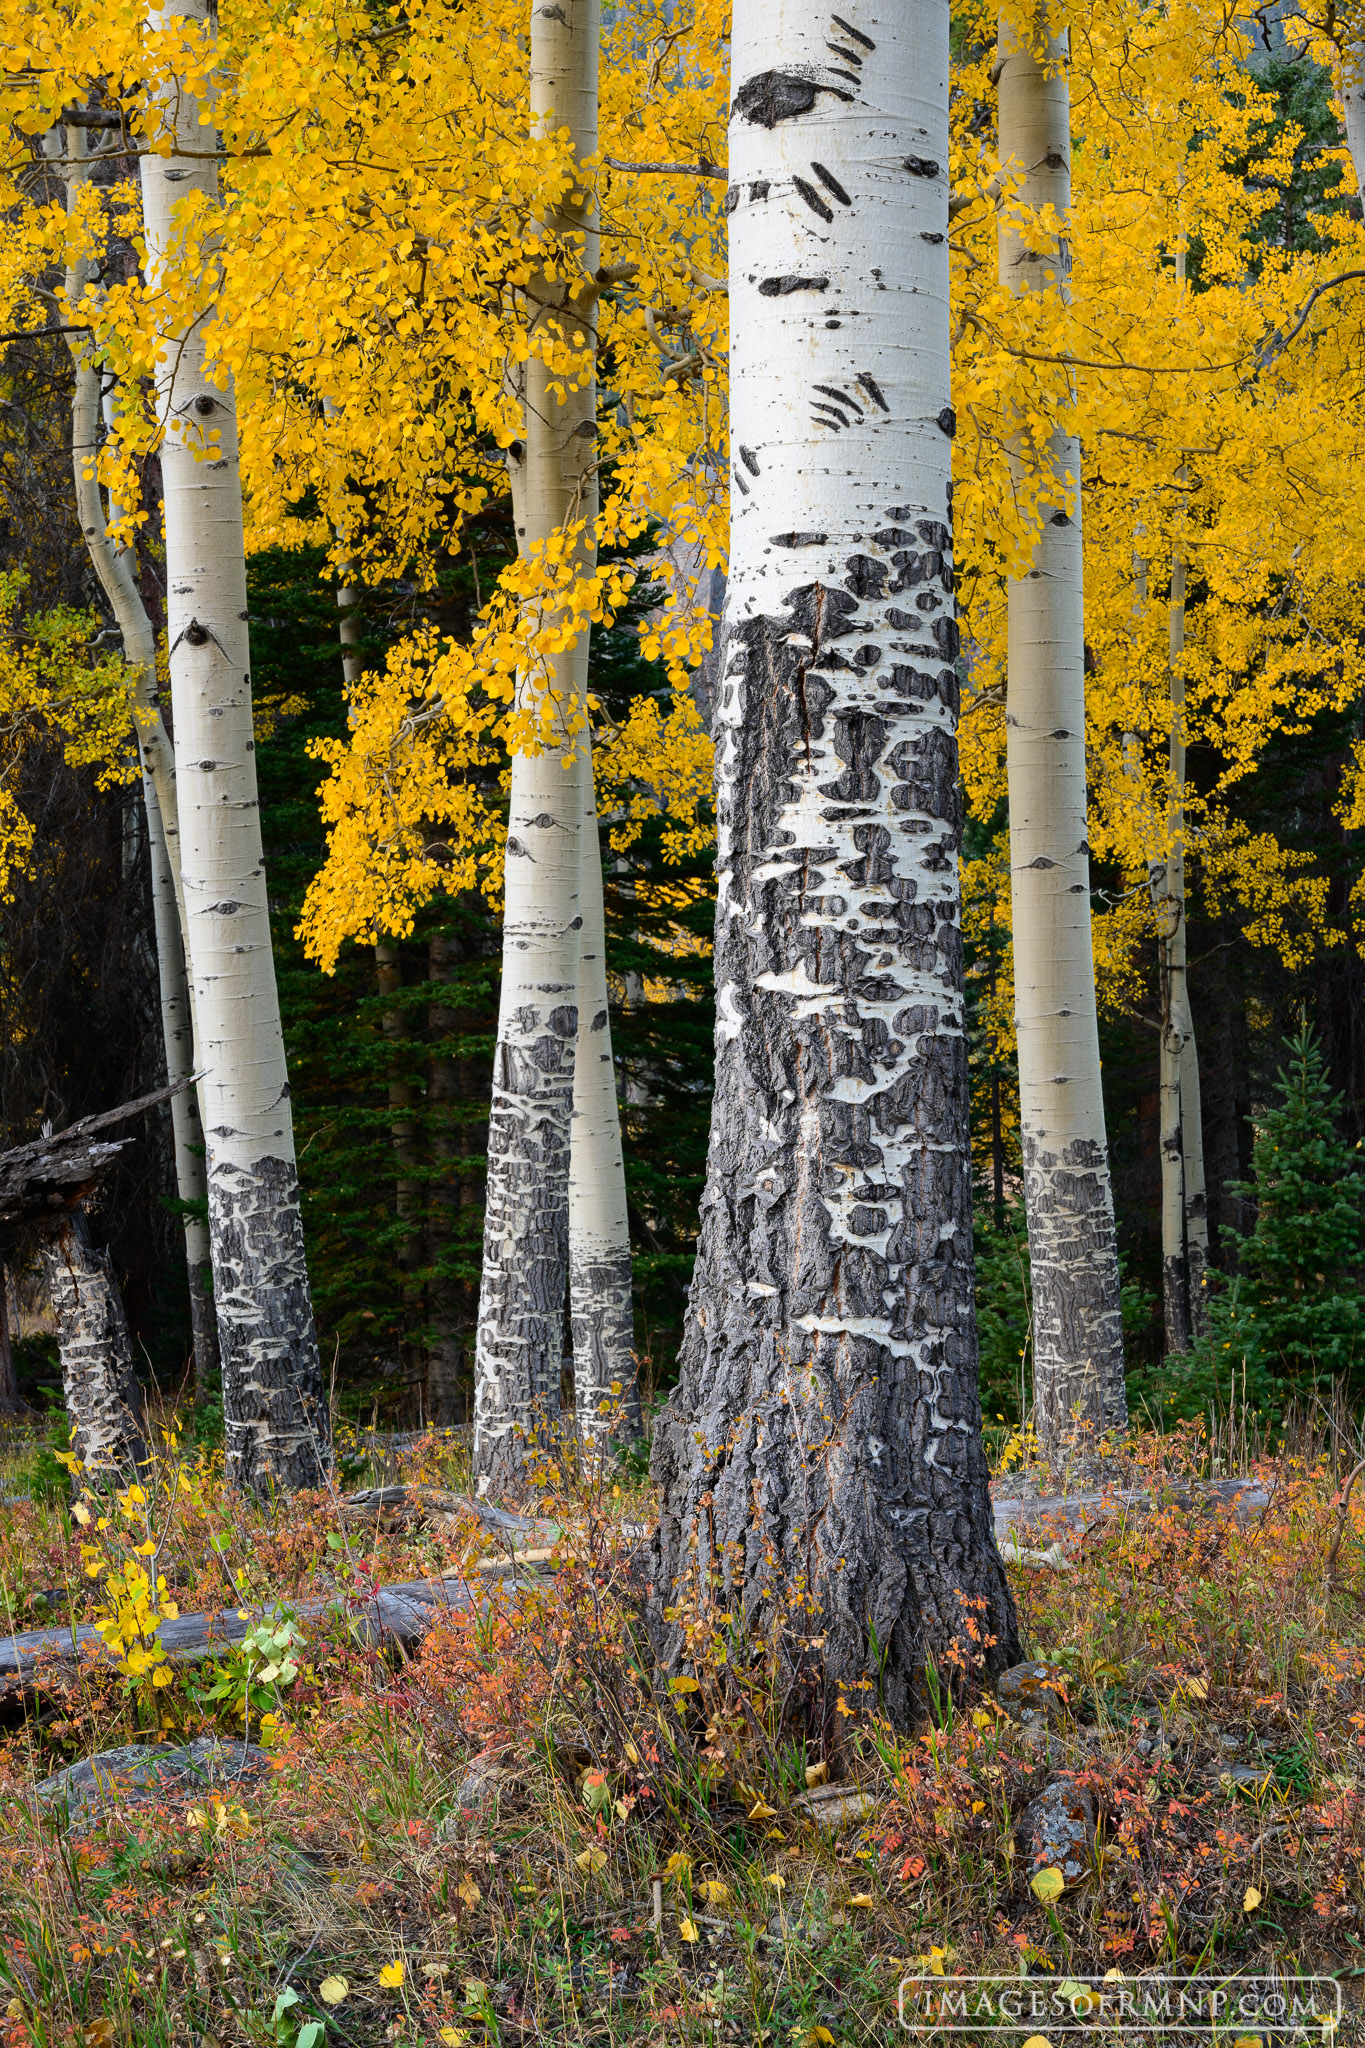 The aspen trees of Rocky Mountain National Park don't have an easy life. Elk chew on their sweet white bark leaving black scars...